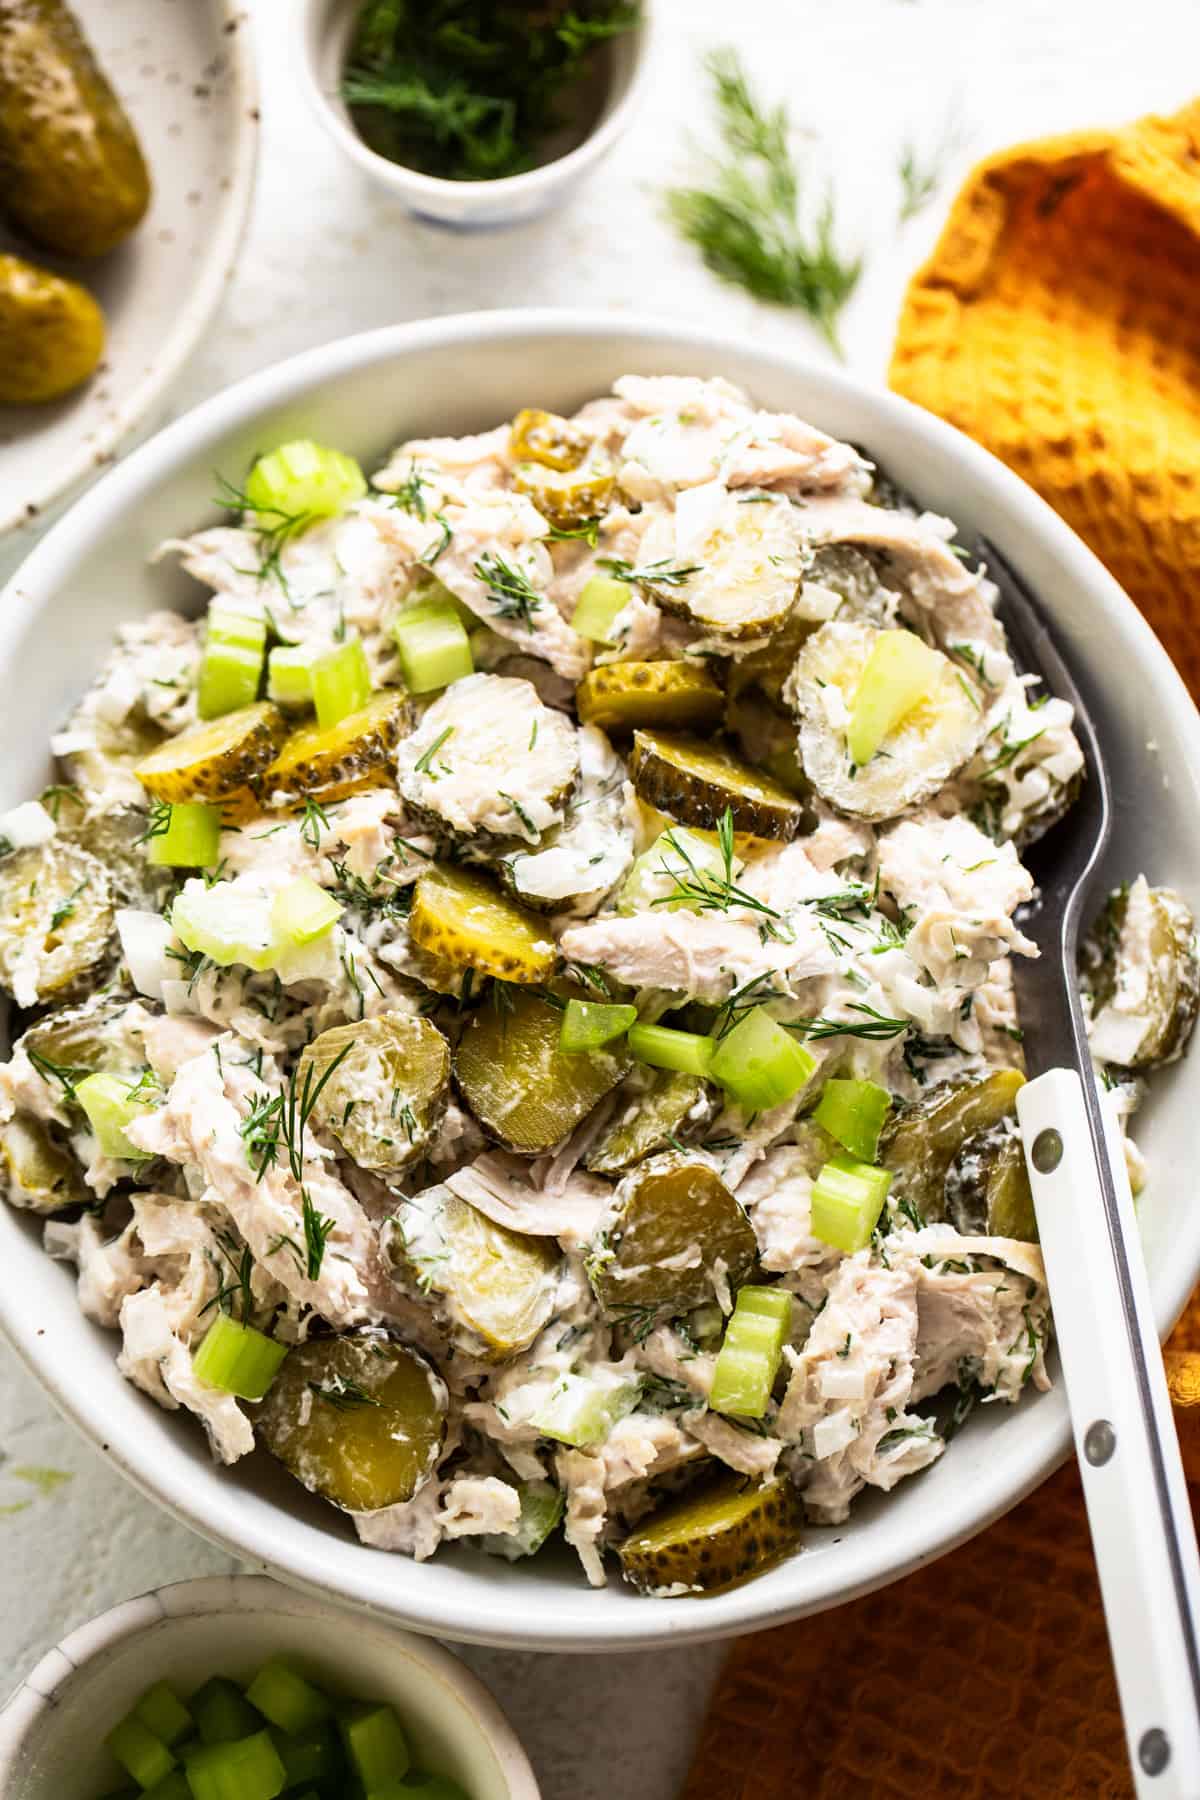 Chicken and pickle salad garnished with dill in a serving dish.